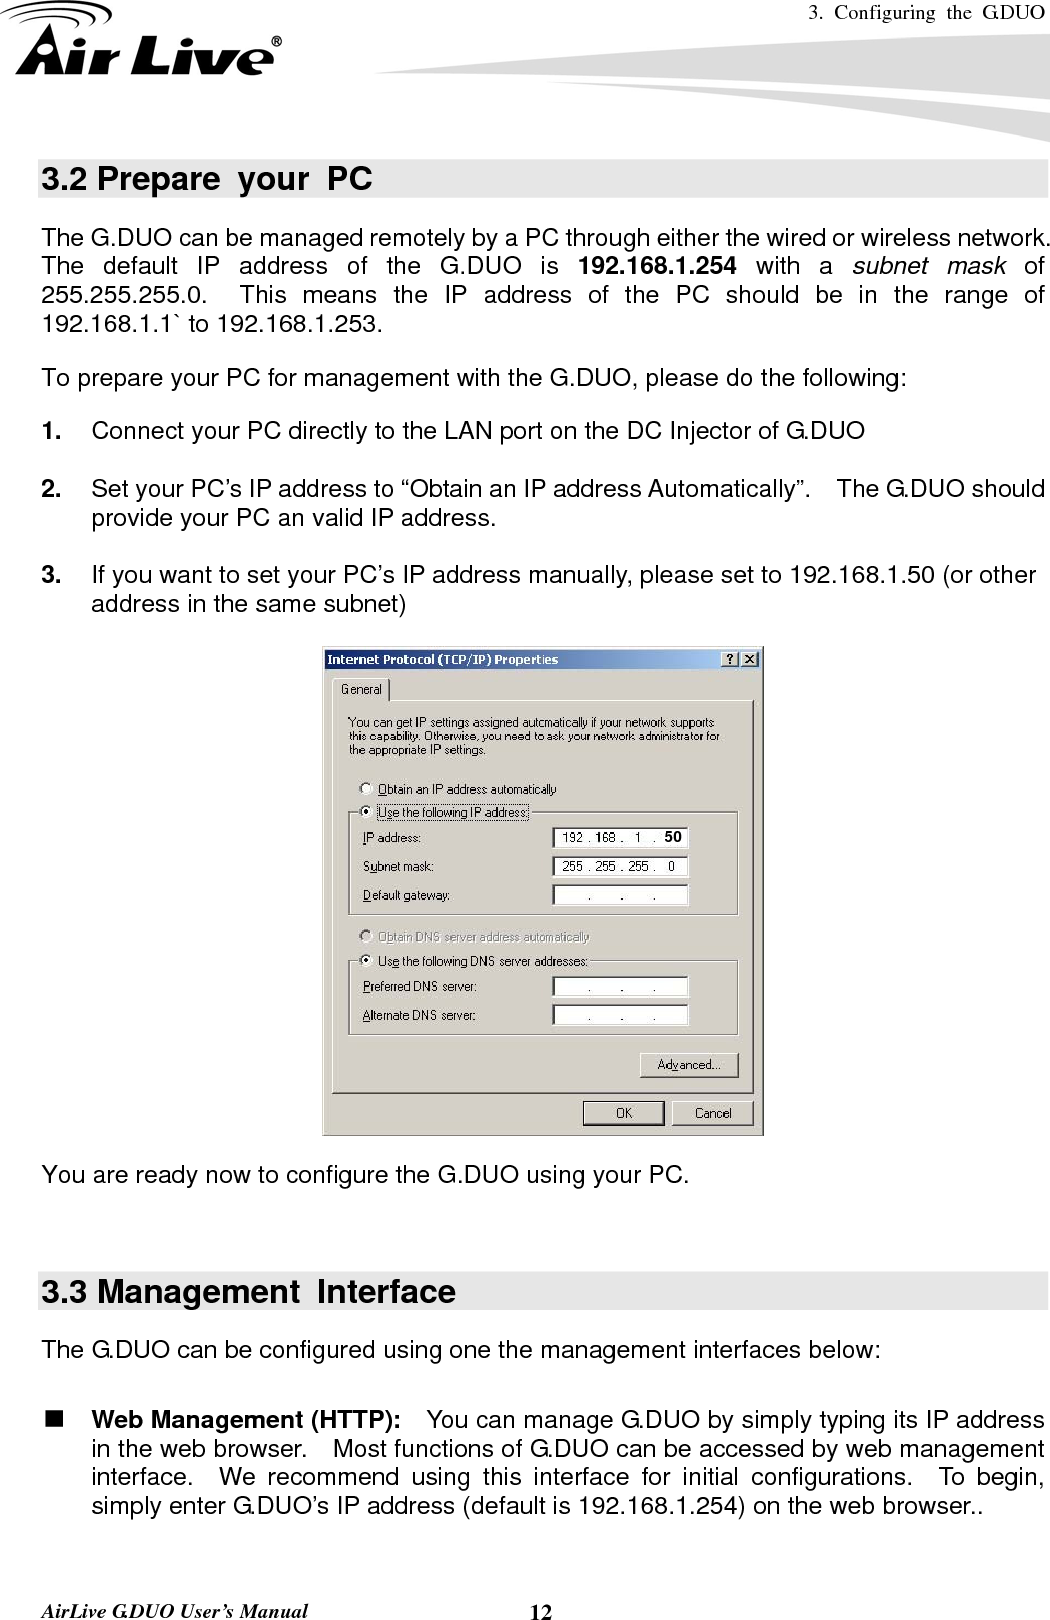 3. Configuring the G.DUO   AirLive G.DUO User’s Manual  123.2 Prepare your PC The G.DUO can be managed remotely by a PC through either the wired or wireless network.   The default IP address of the G.DUO is 192.168.1.254 with a subnet mask of  255.255.255.0.  This means the IP address of the PC should be in the range of 192.168.1.1` to 192.168.1.253.   To prepare your PC for management with the G.DUO, please do the following: 1.  Connect your PC directly to the LAN port on the DC Injector of G.DUO  2.  Set your PC’s IP address to “Obtain an IP address Automatically”.    The G.DUO should provide your PC an valid IP address.  3.  If you want to set your PC’s IP address manually, please set to 192.168.1.50 (or other address in the same subnet)    You are ready now to configure the G.DUO using your PC.       3.3 Management  Interface The G.DUO can be configured using one the management interfaces below:  Web Management (HTTP):    You can manage G.DUO by simply typing its IP address in the web browser.    Most functions of G.DUO can be accessed by web management interface.  We recommend using this interface for initial configurations.  To begin, simply enter G.DUO’s IP address (default is 192.168.1.254) on the web browser..  50 